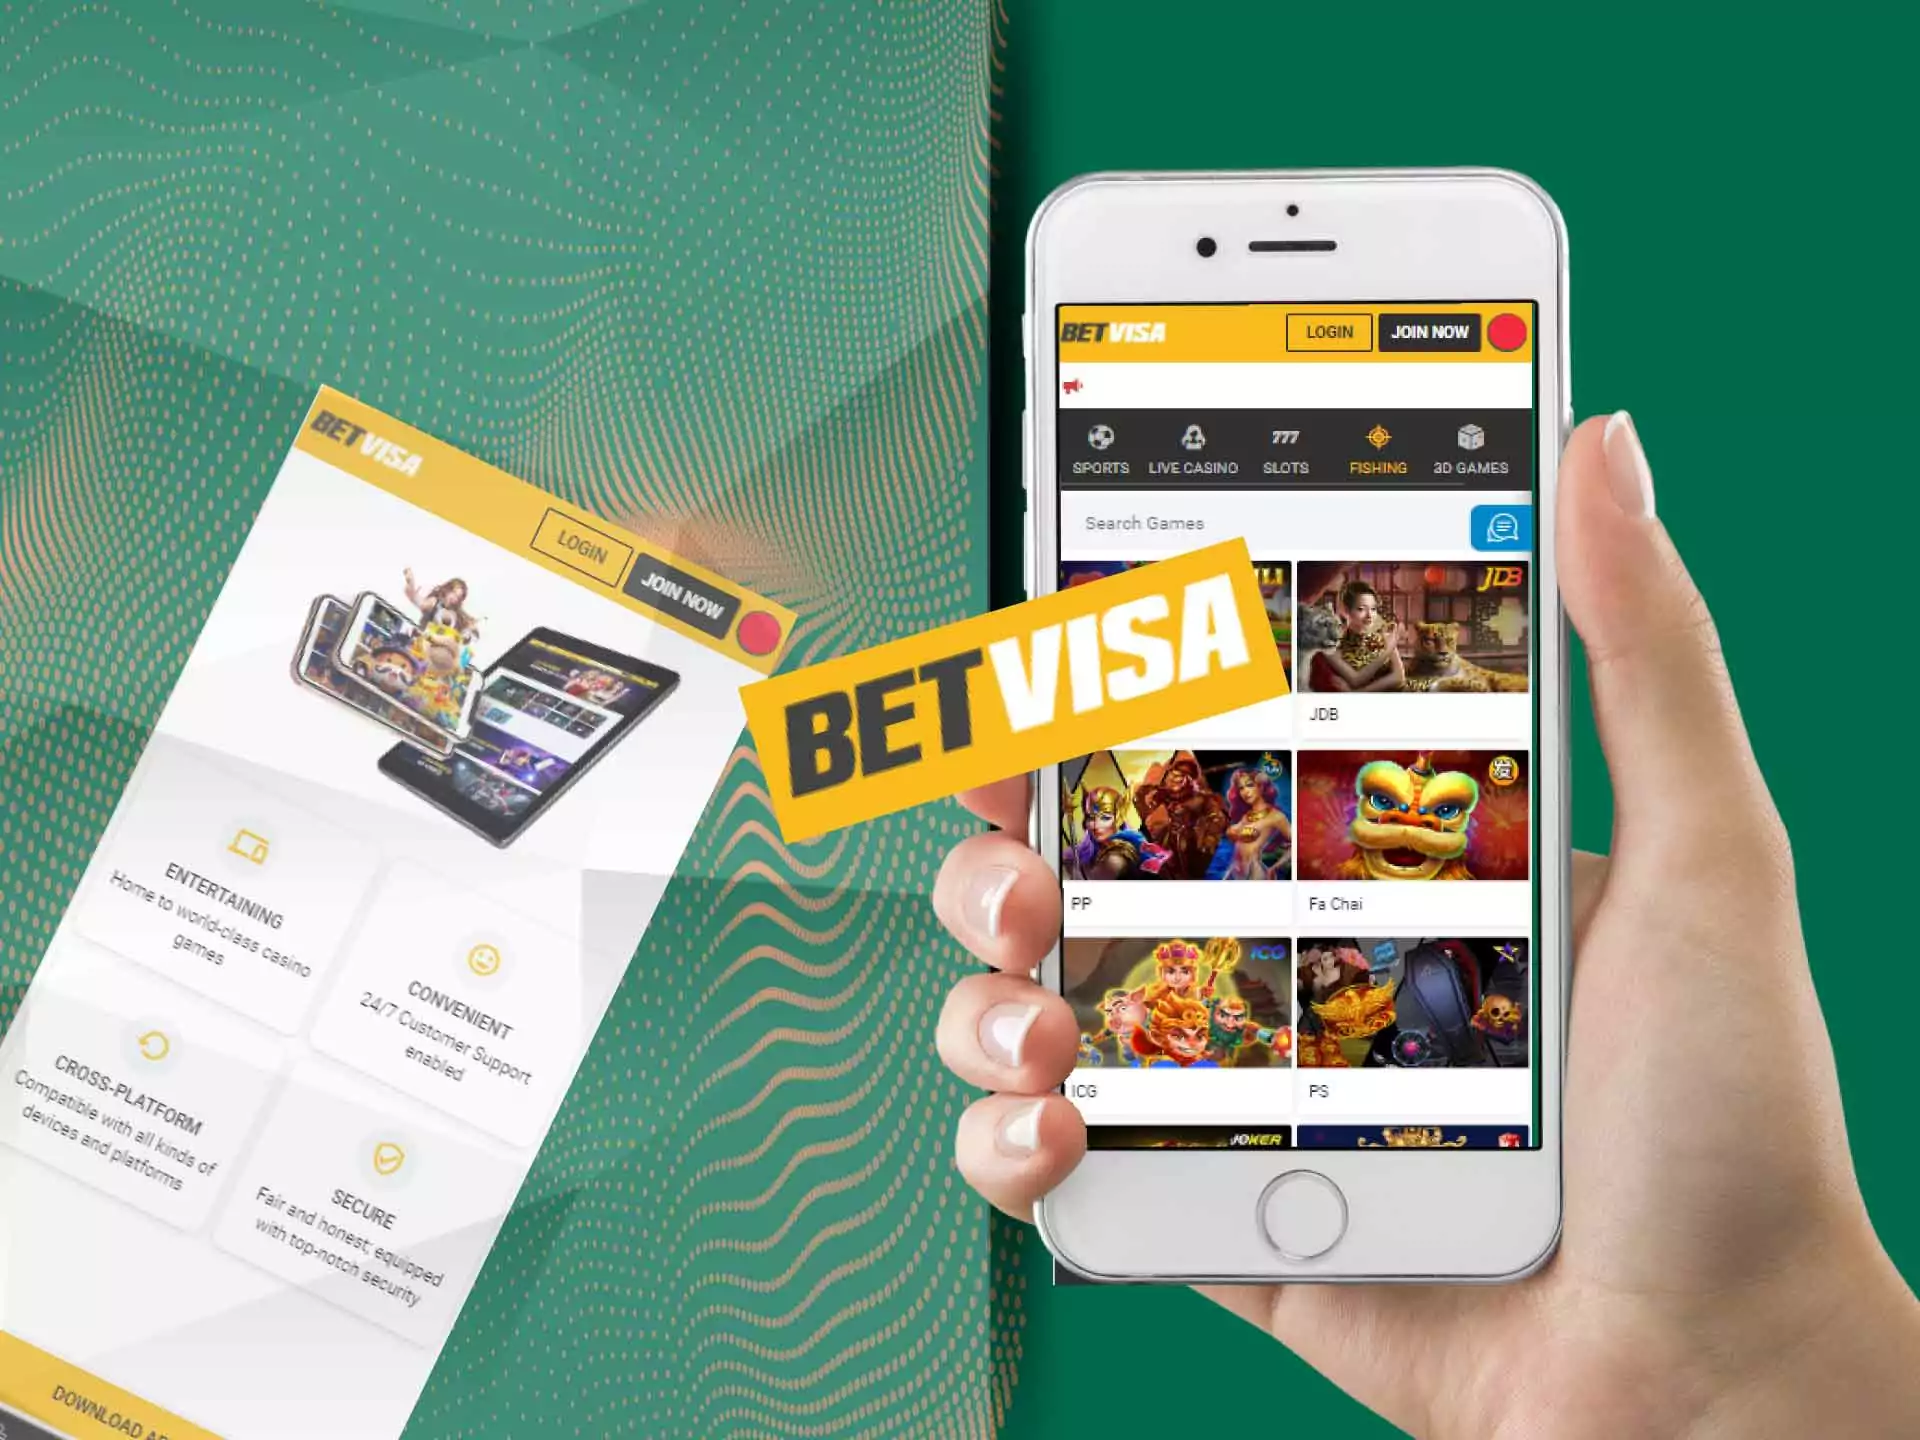 BetVisa has a great and convenient mobile app.